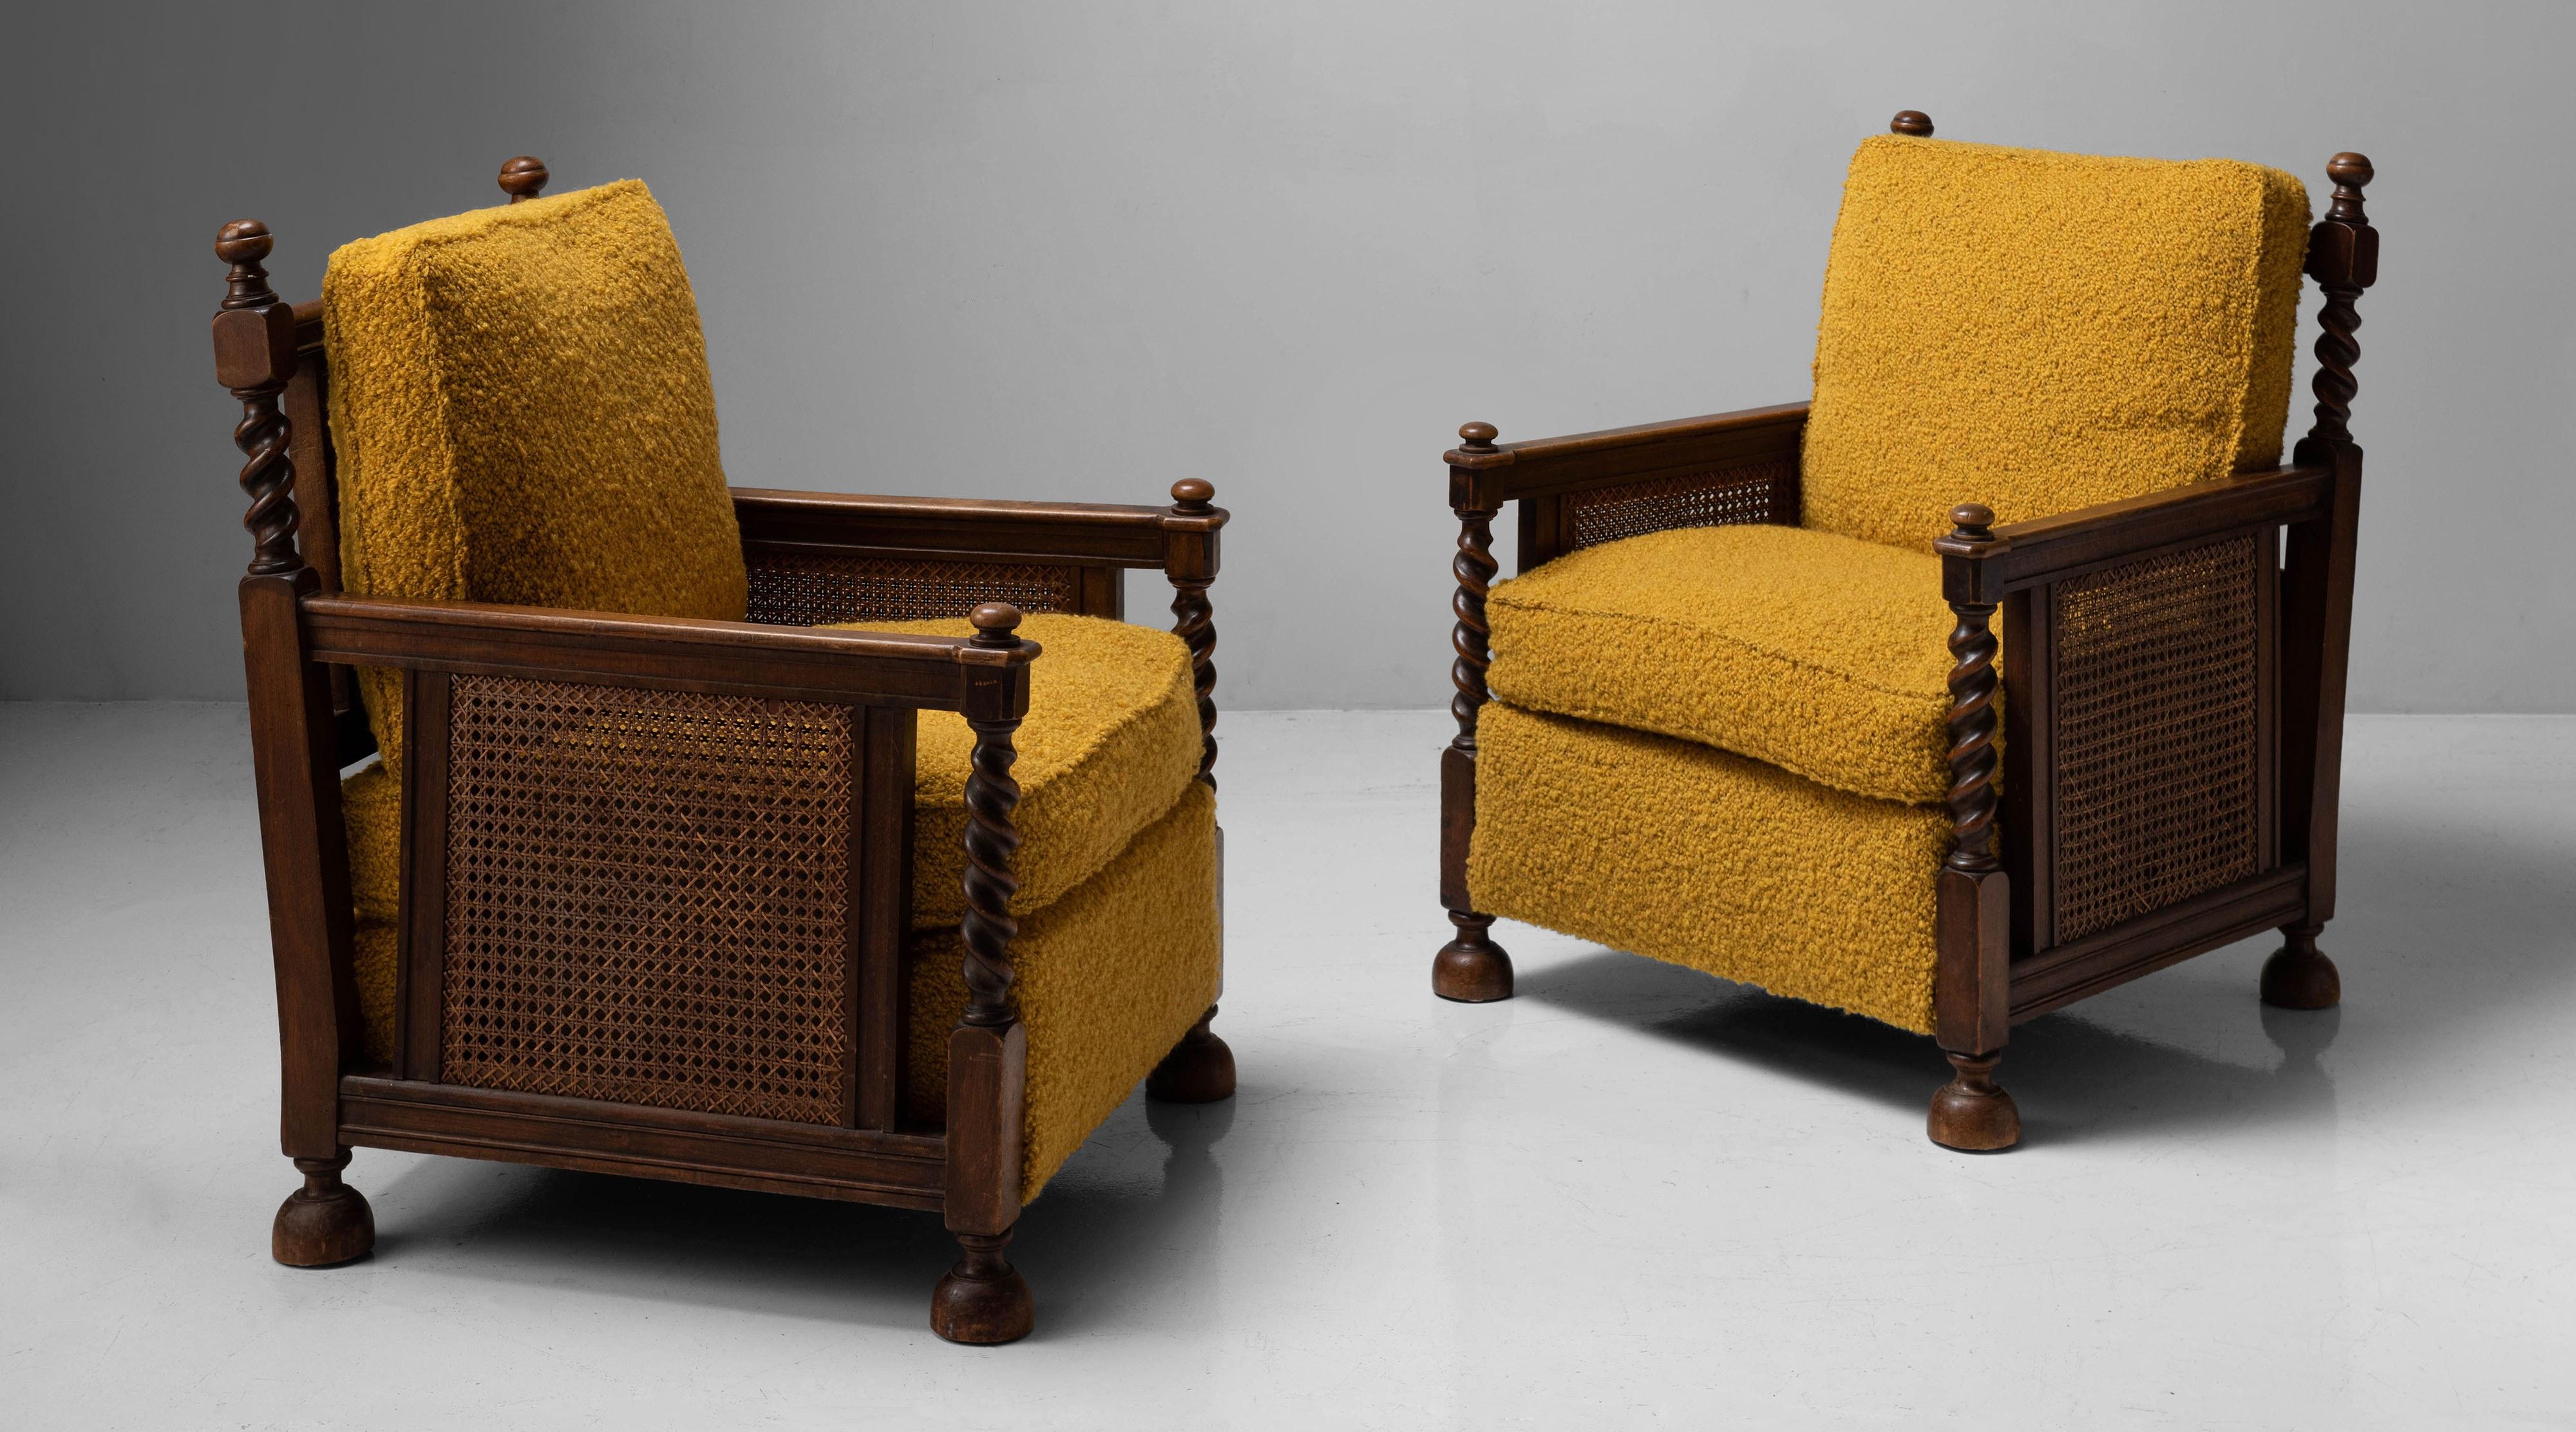 Newly upholstered cushions, oak and hardwood frame with spiral carving and cane sides and back.


Measures: 30